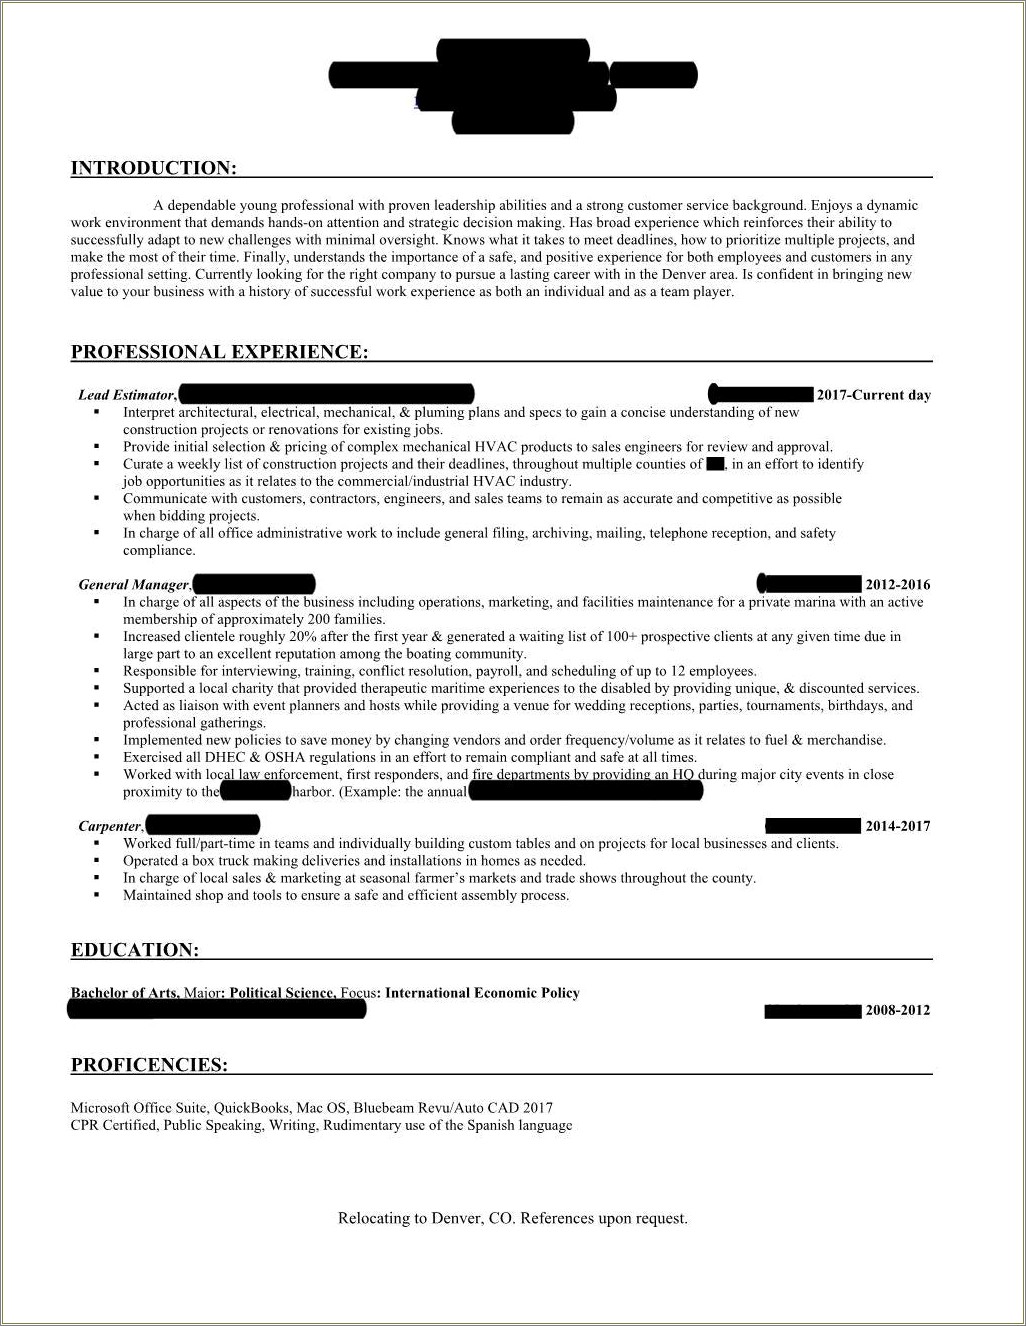 Job Application Letter With Resume Attached